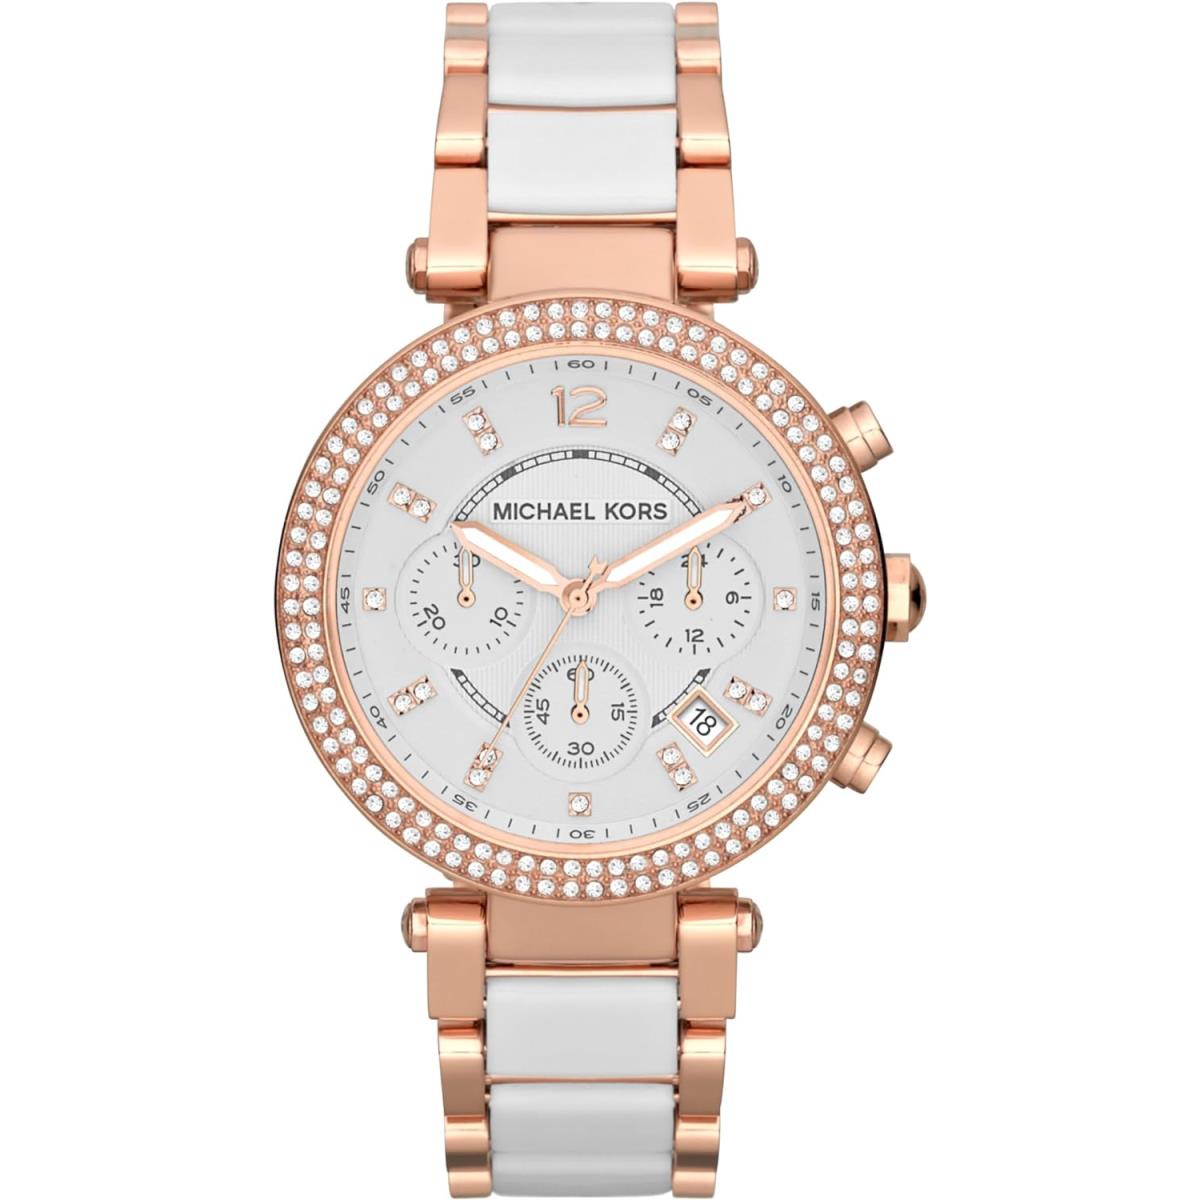 Michael Kors Parker Stainless Steel Pav Crystal Steel Leather or Silicone Band Rose Gold/White